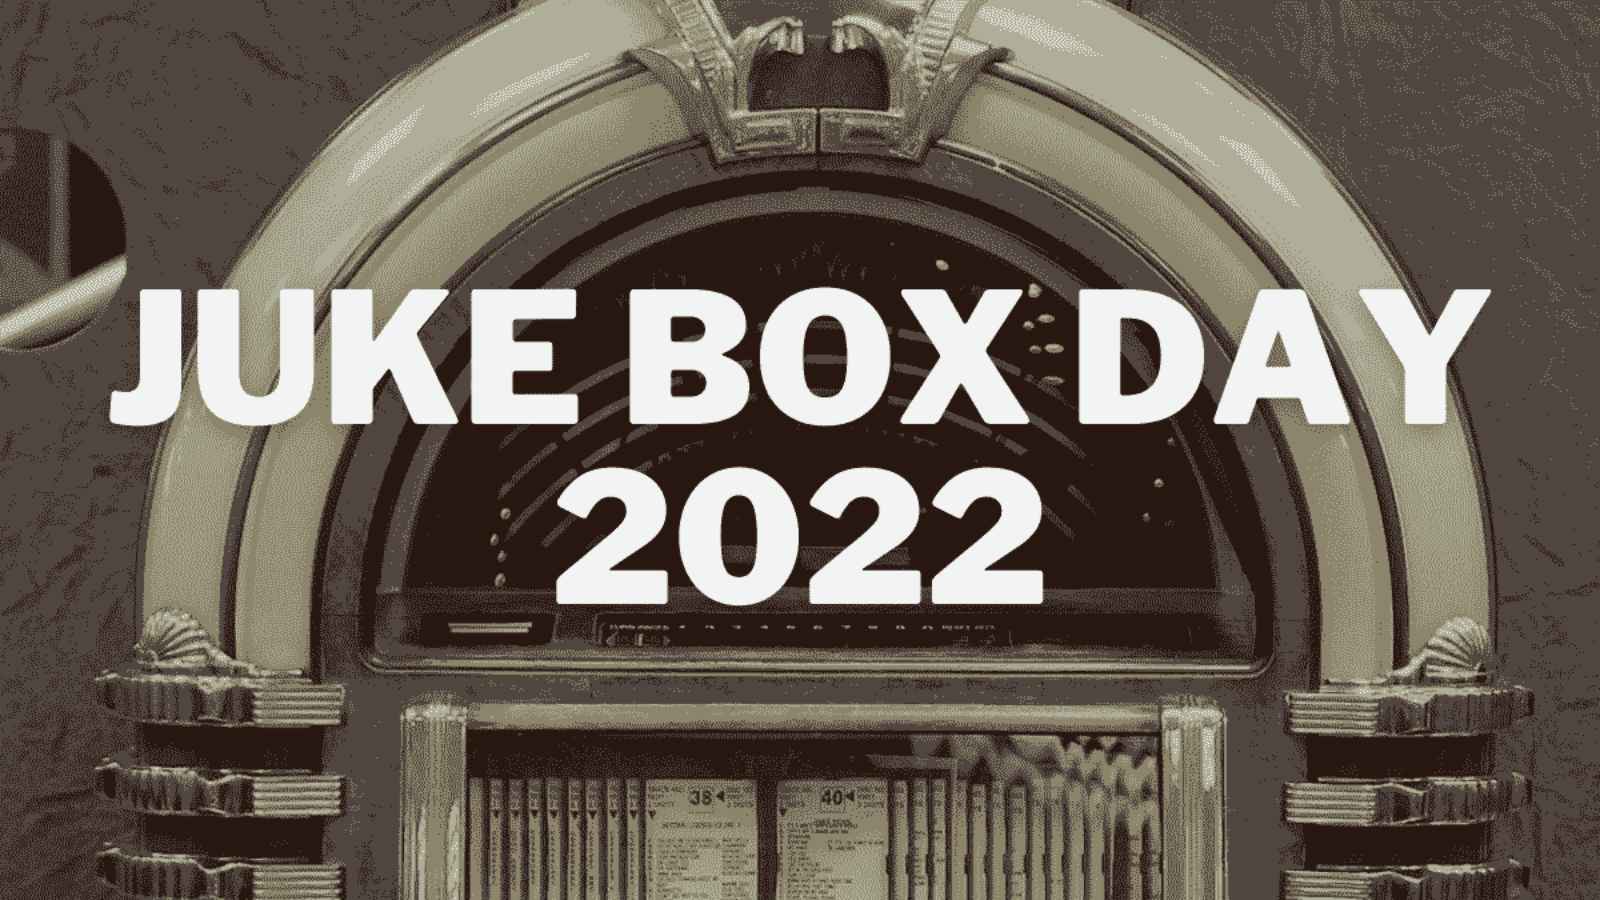 National Jukebox Day 2022: Date, History and Significance of the day